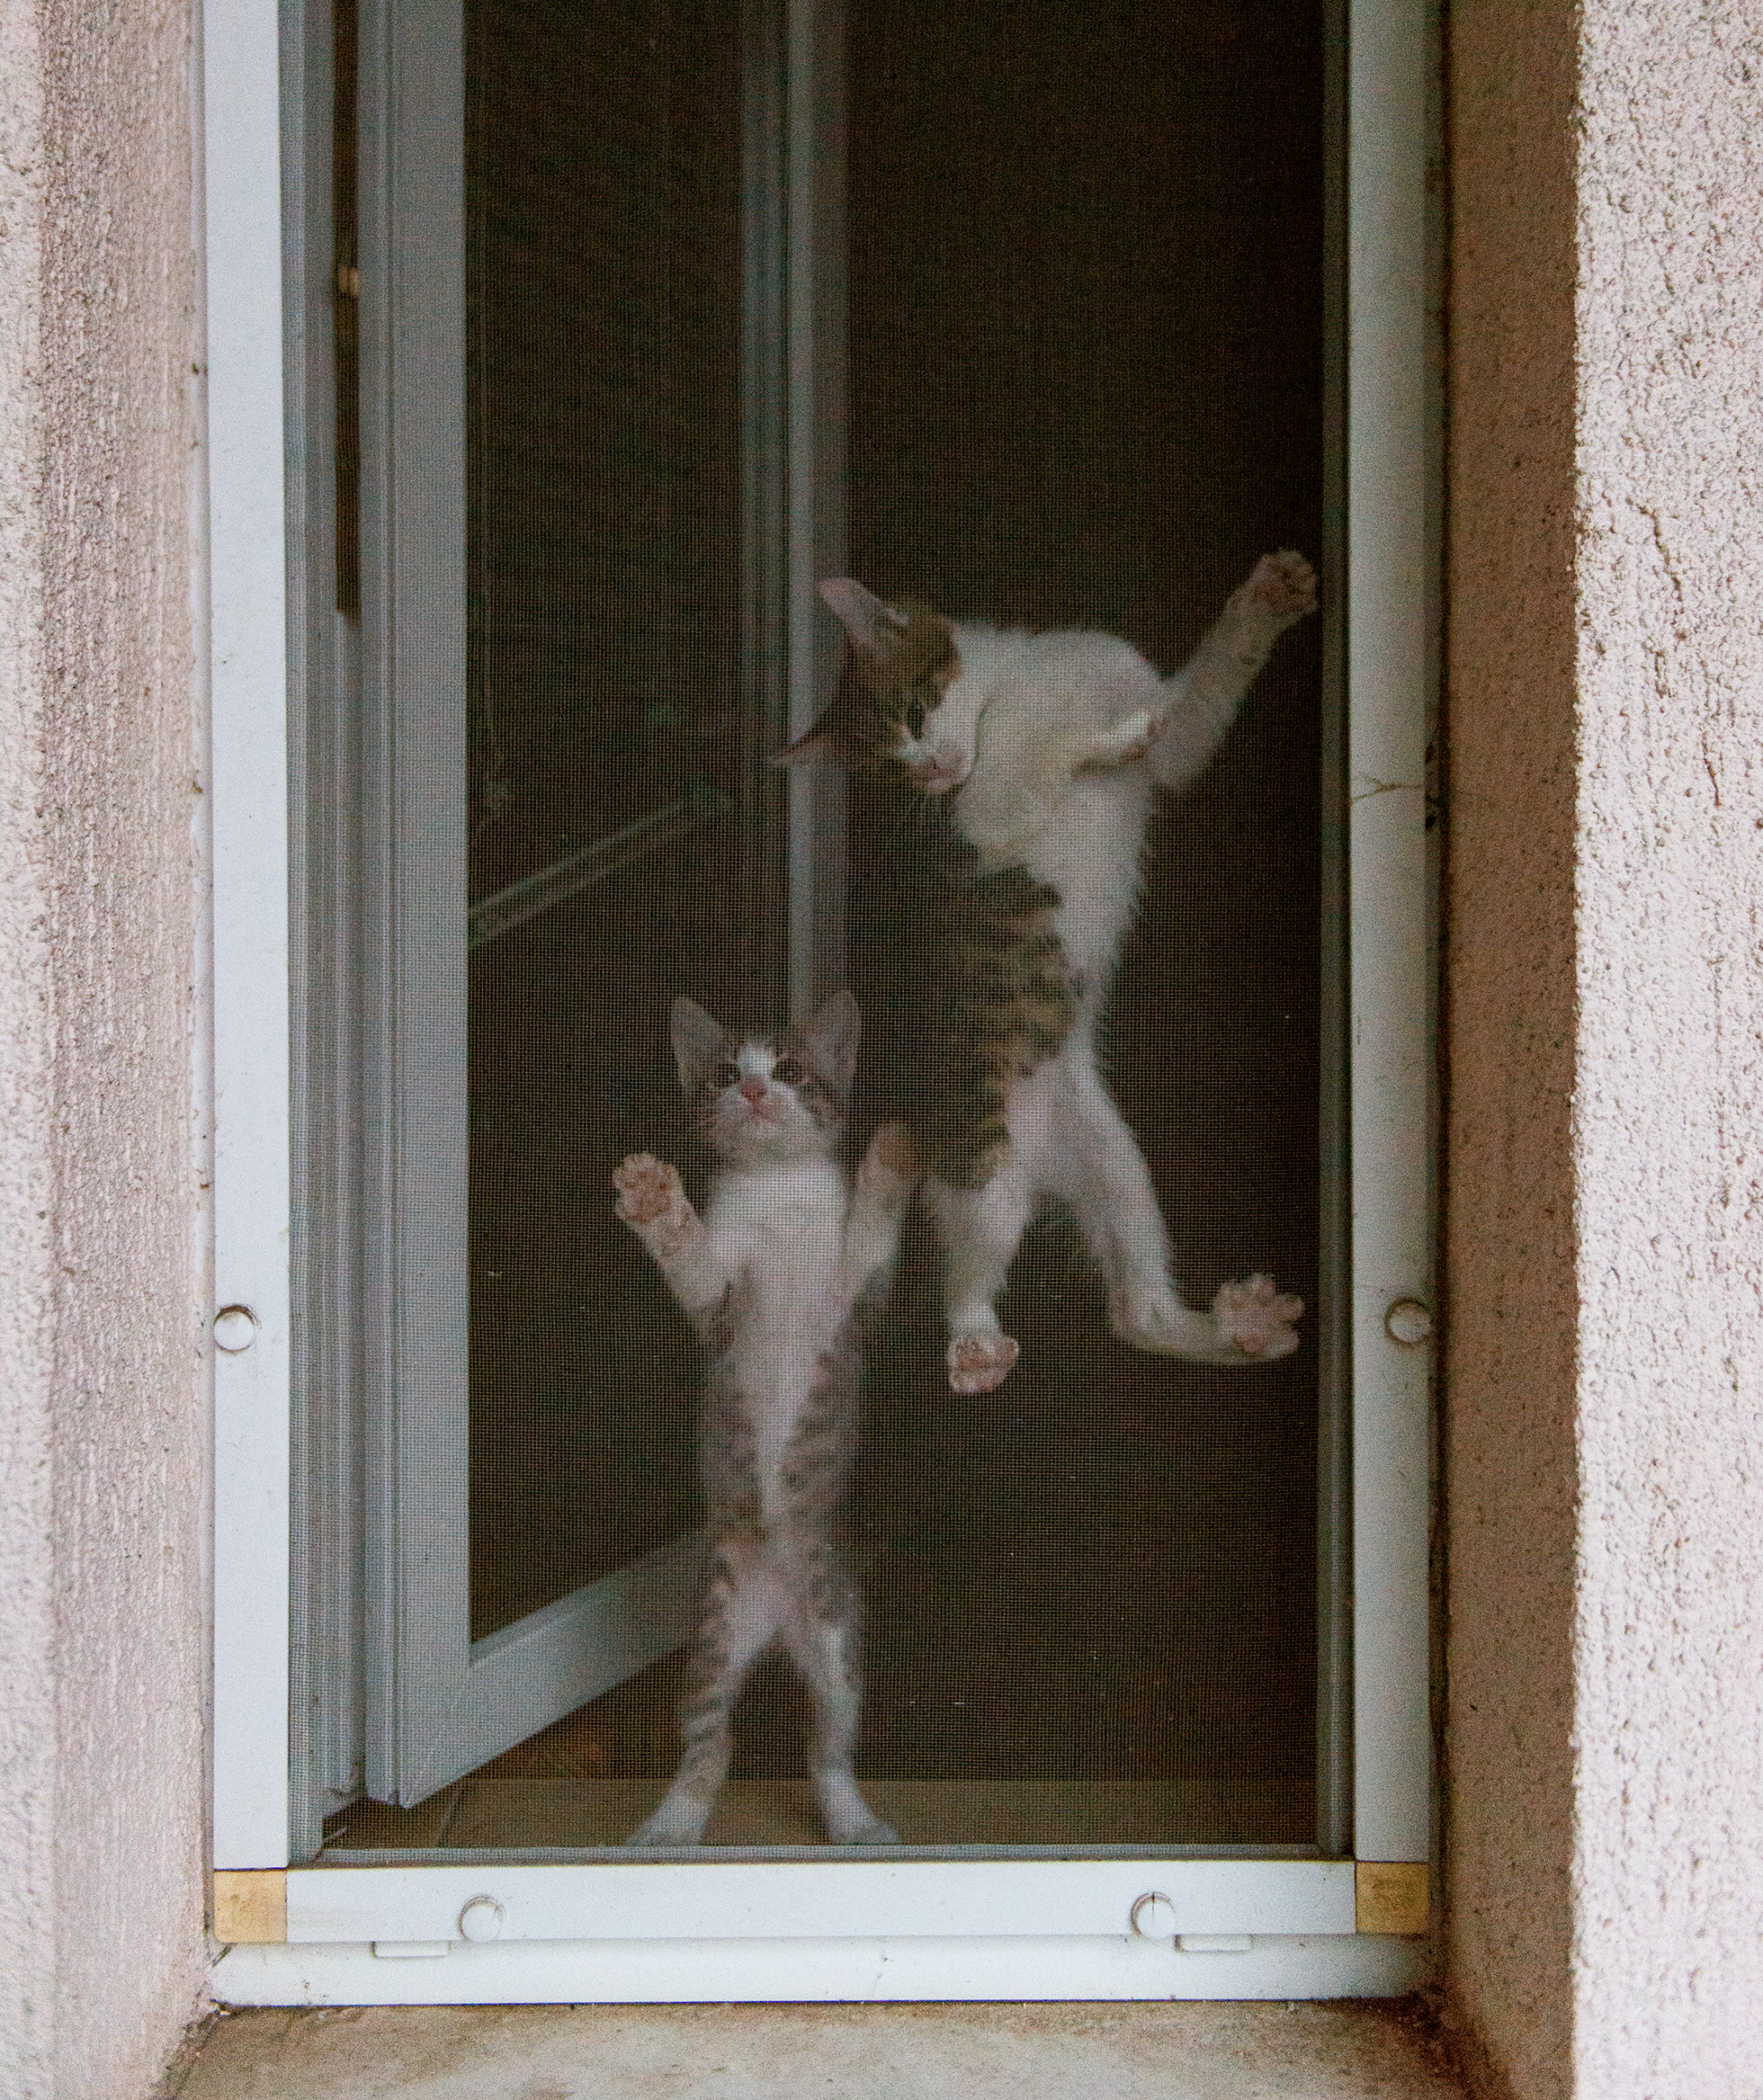 Two gray tabby kittens hanging from screen of open window